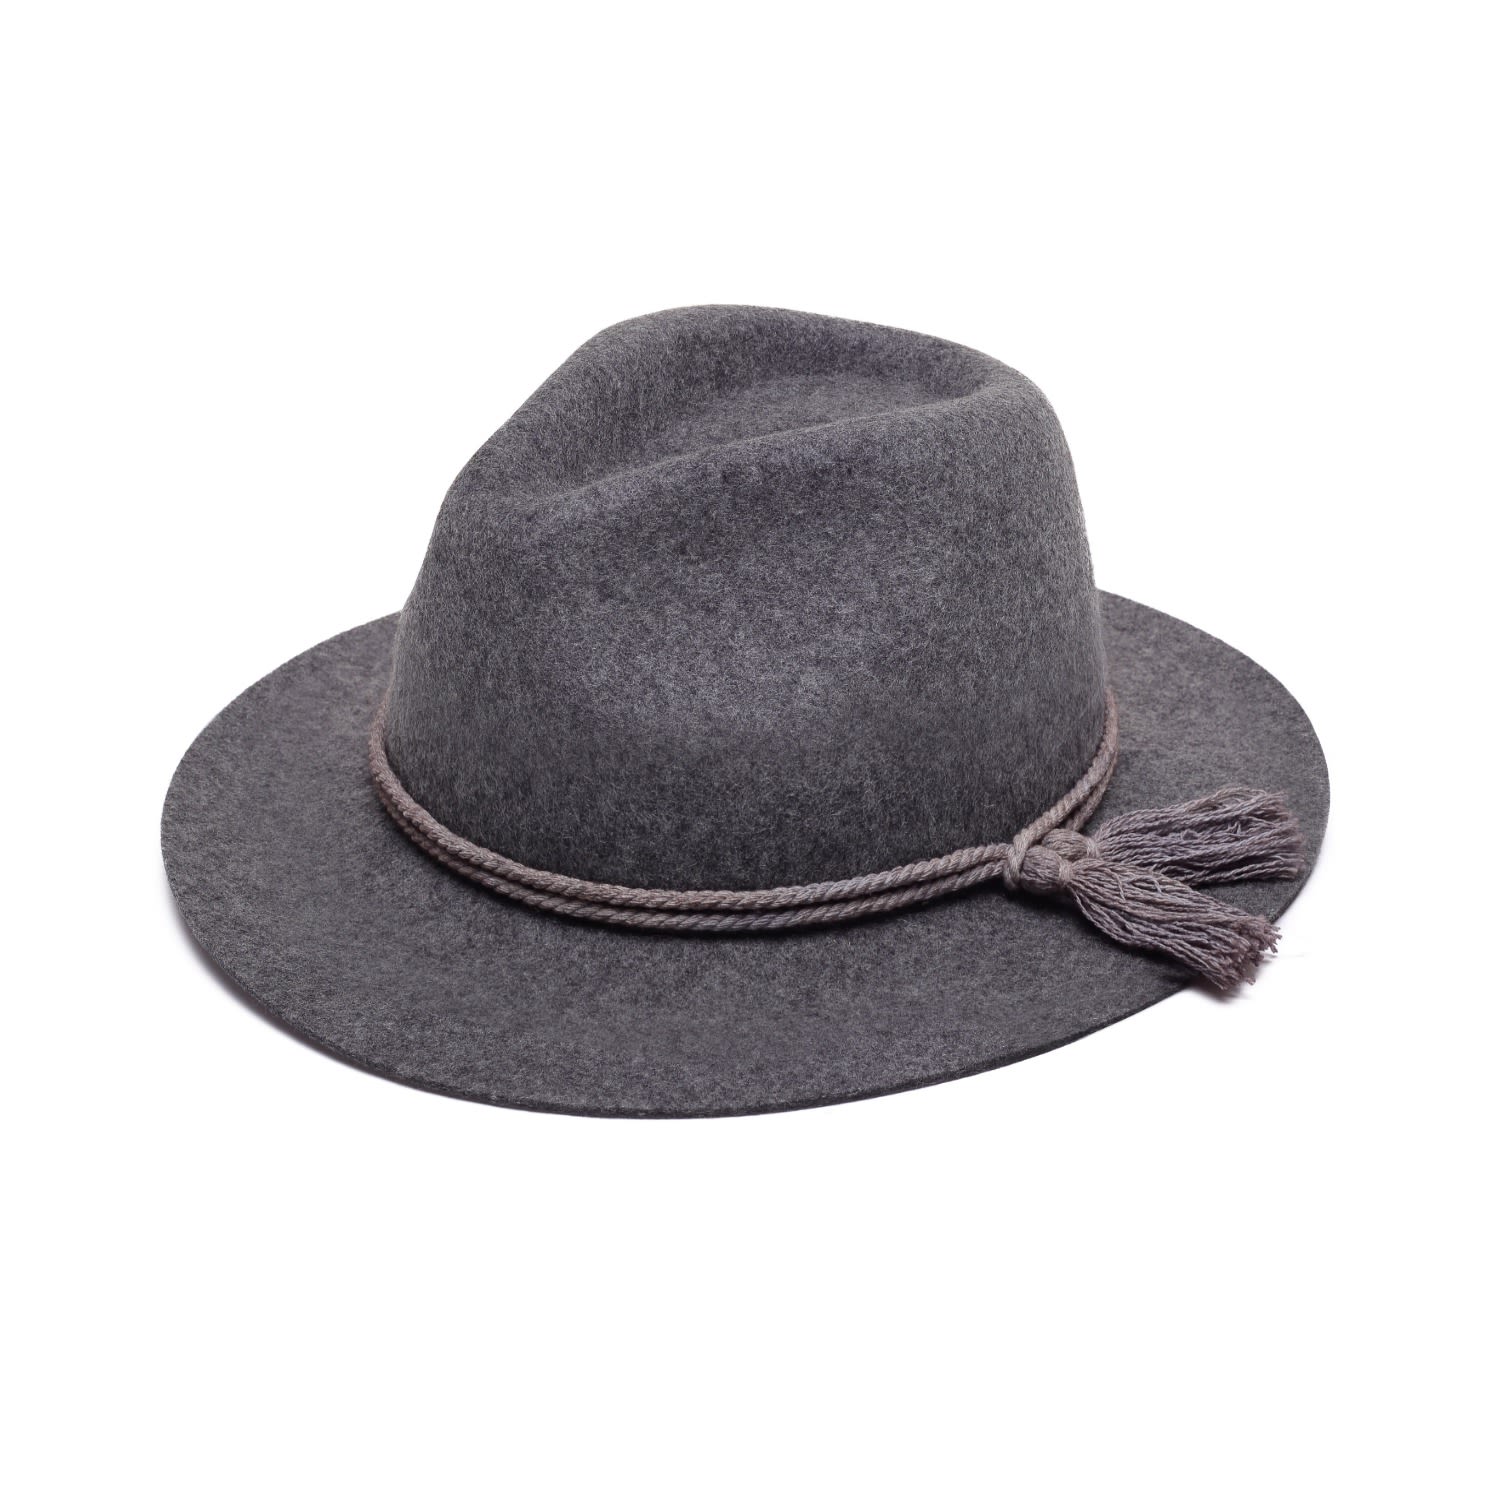 Women’s Grey Fedora Hat With Cotton Tassels Extra Large Justine Hats